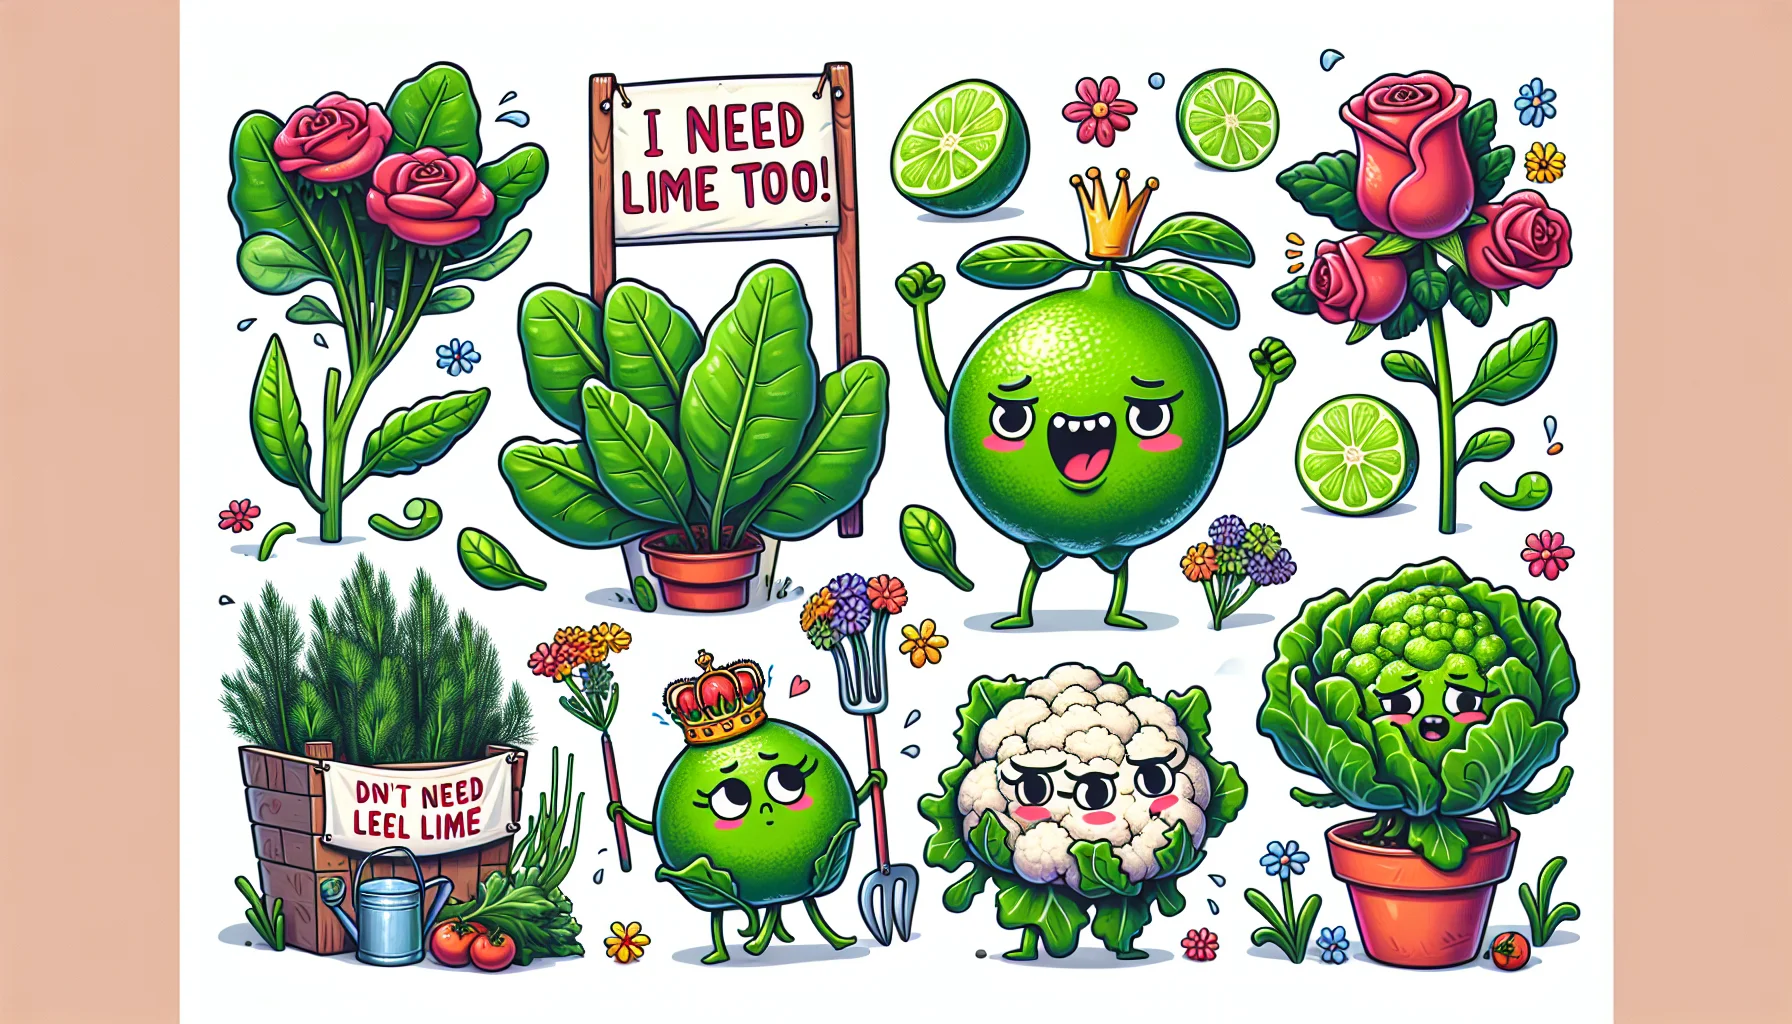 A fun and lively garden scene with various types of garden vegetables and flowers arranged in humorous vignettes. One notable spot shows a plump lime, with a cartoon face and tiny arms, acting like a king being carried on a leafy throne by spinach plants acting like servants, indicating their need for lime. Another side depicts a cauliflower with the text 'I need lime too' in a protest banner format. Roses in the corner are seen having a cute, friendly disagreement with daisies on the subject of lime needs, creating a friendly, educational, and enticing allure for gardening.